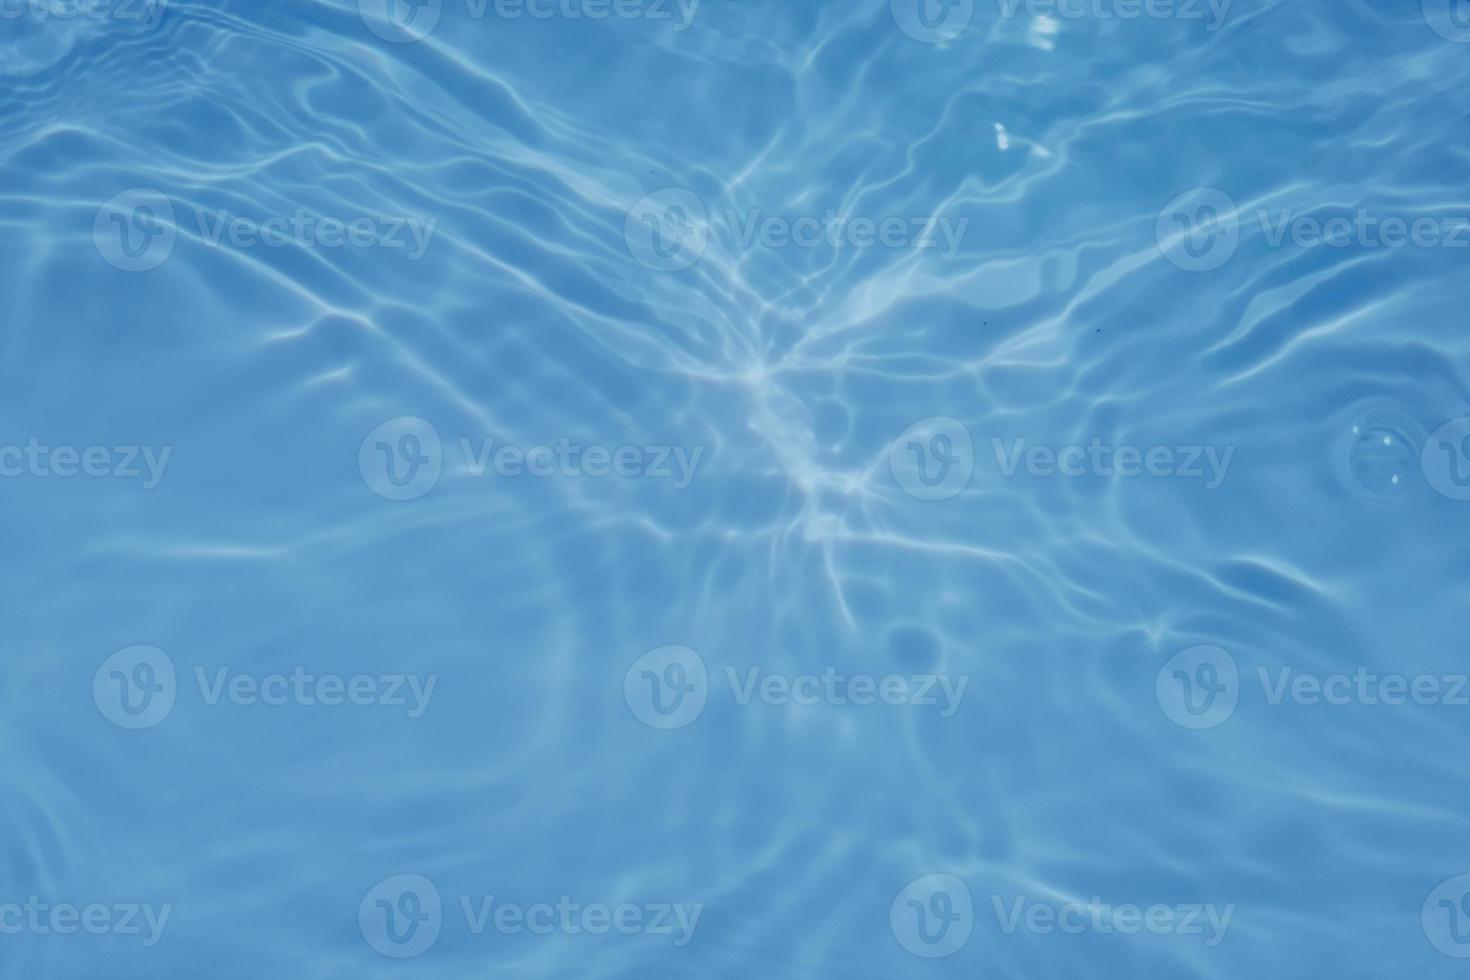 Defocus blurred transparent blue colored clear calm water surface texture with splashes and bubbles. Trendy abstract nature background. Water waves in sunlight with copy space. Blue watercolor texture photo